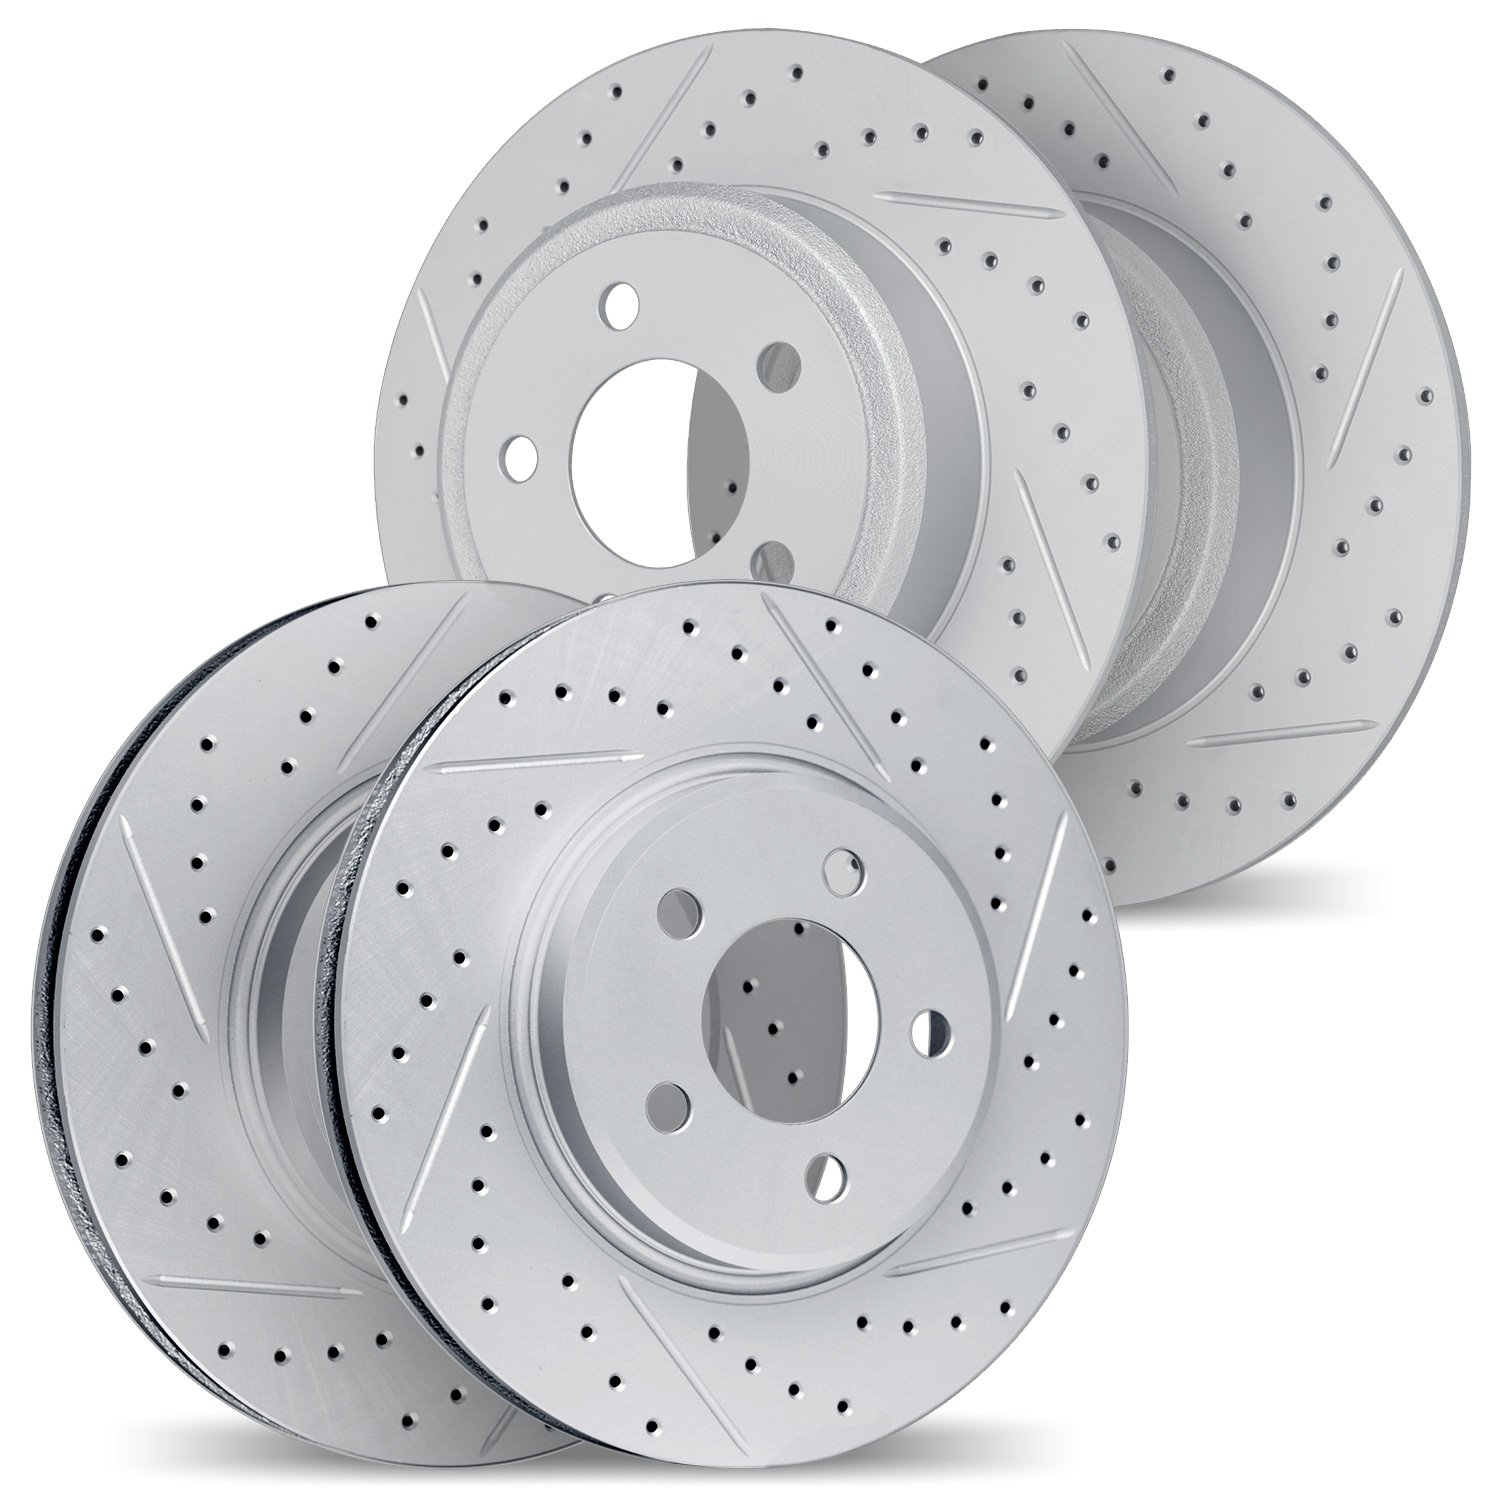 2004-59032 Geoperformance Drilled/Slotted Brake Rotors, Fits Select Acura/Honda, Position: Front and Rear